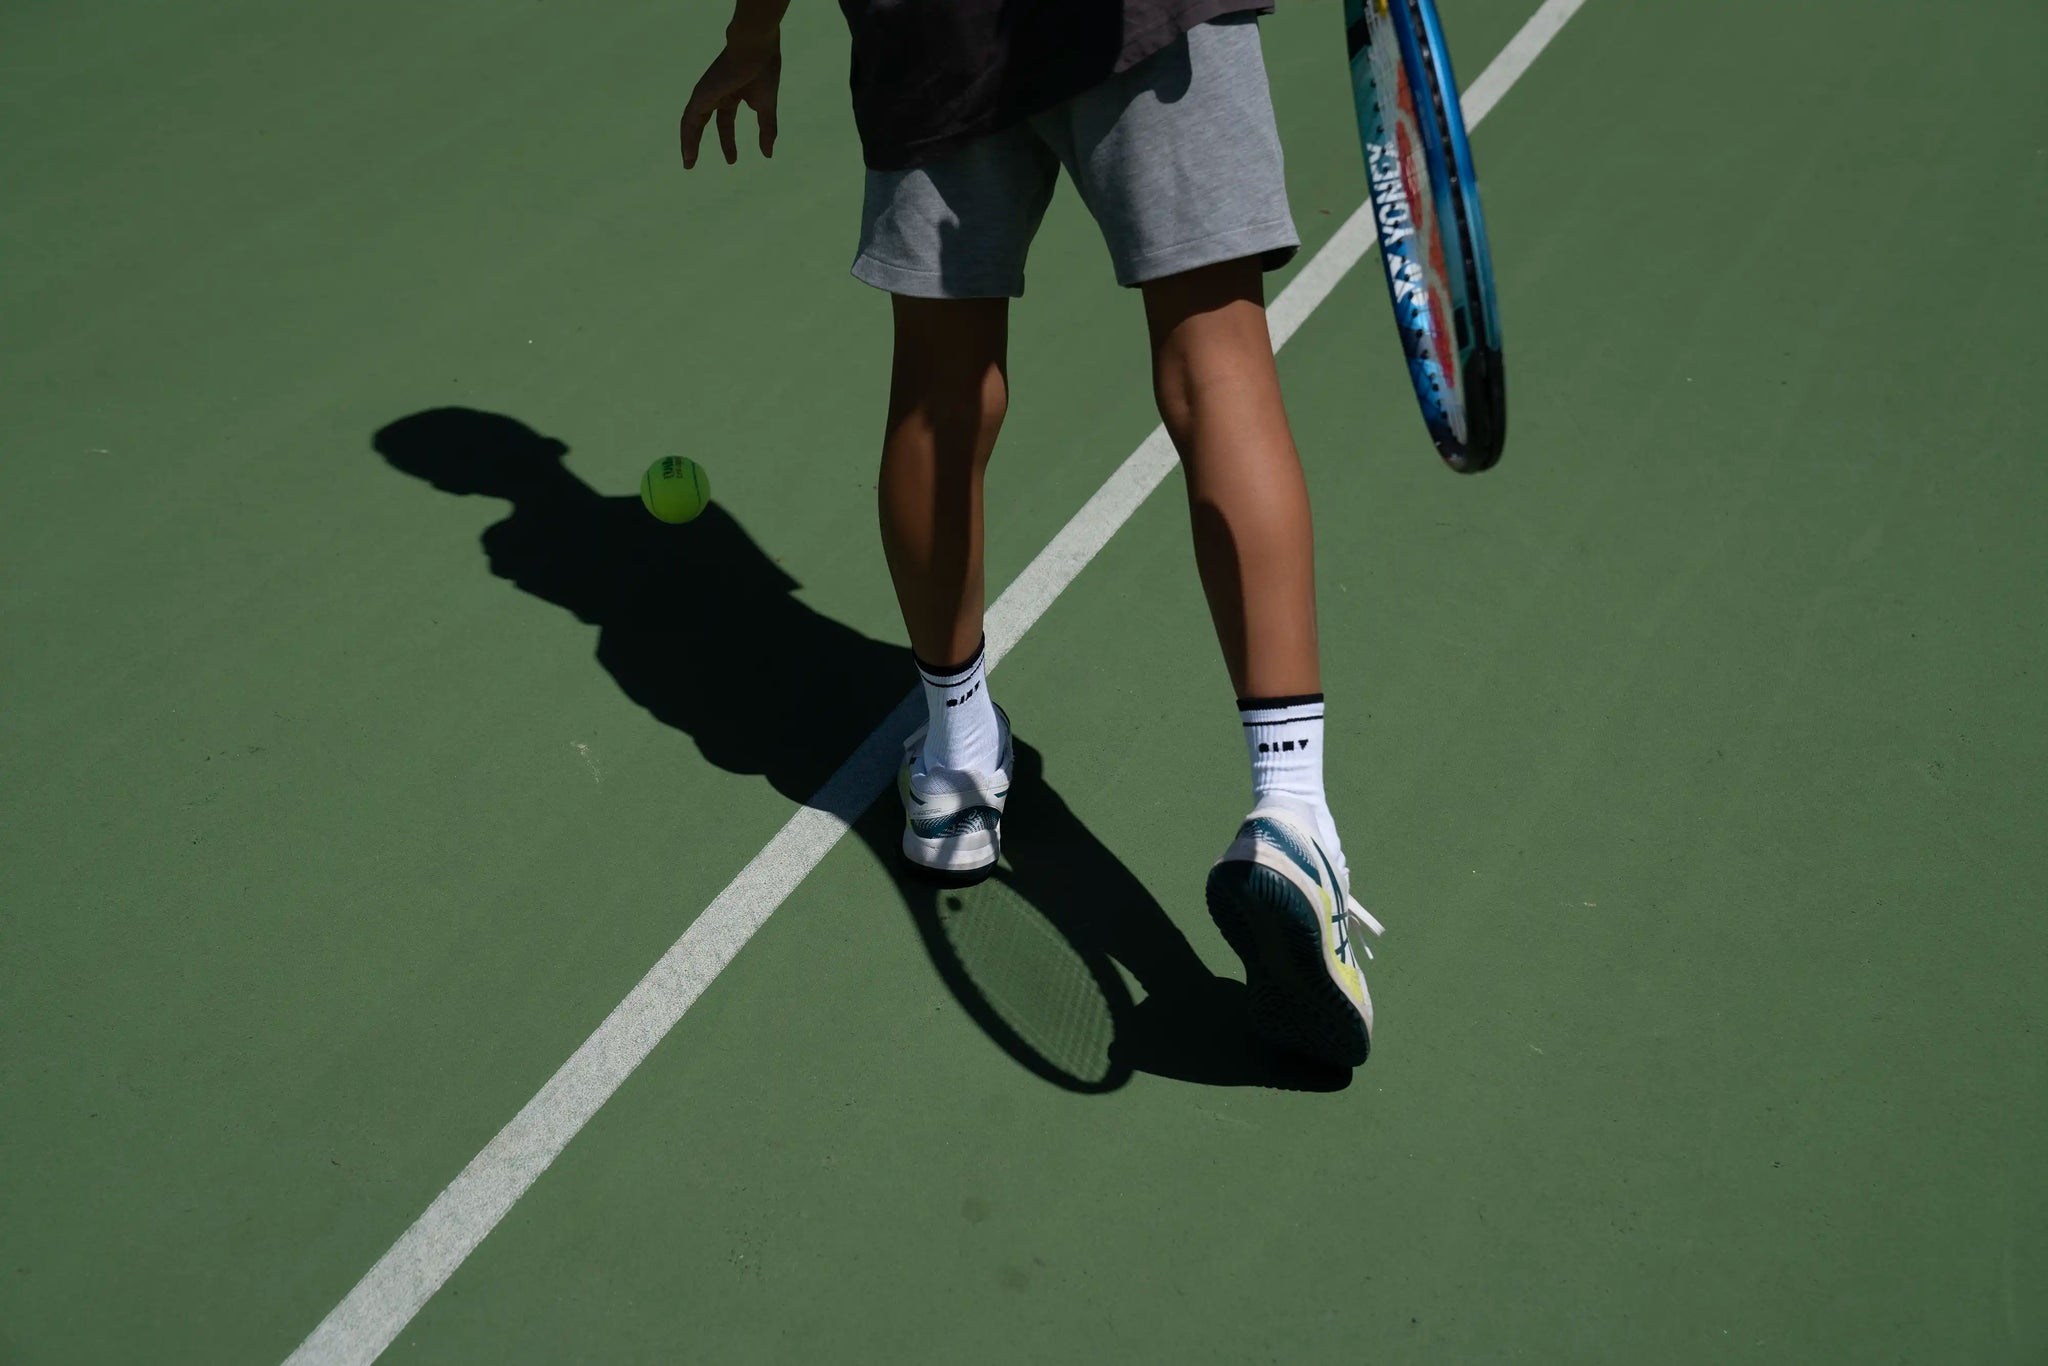 Do tennis socks make a difference?